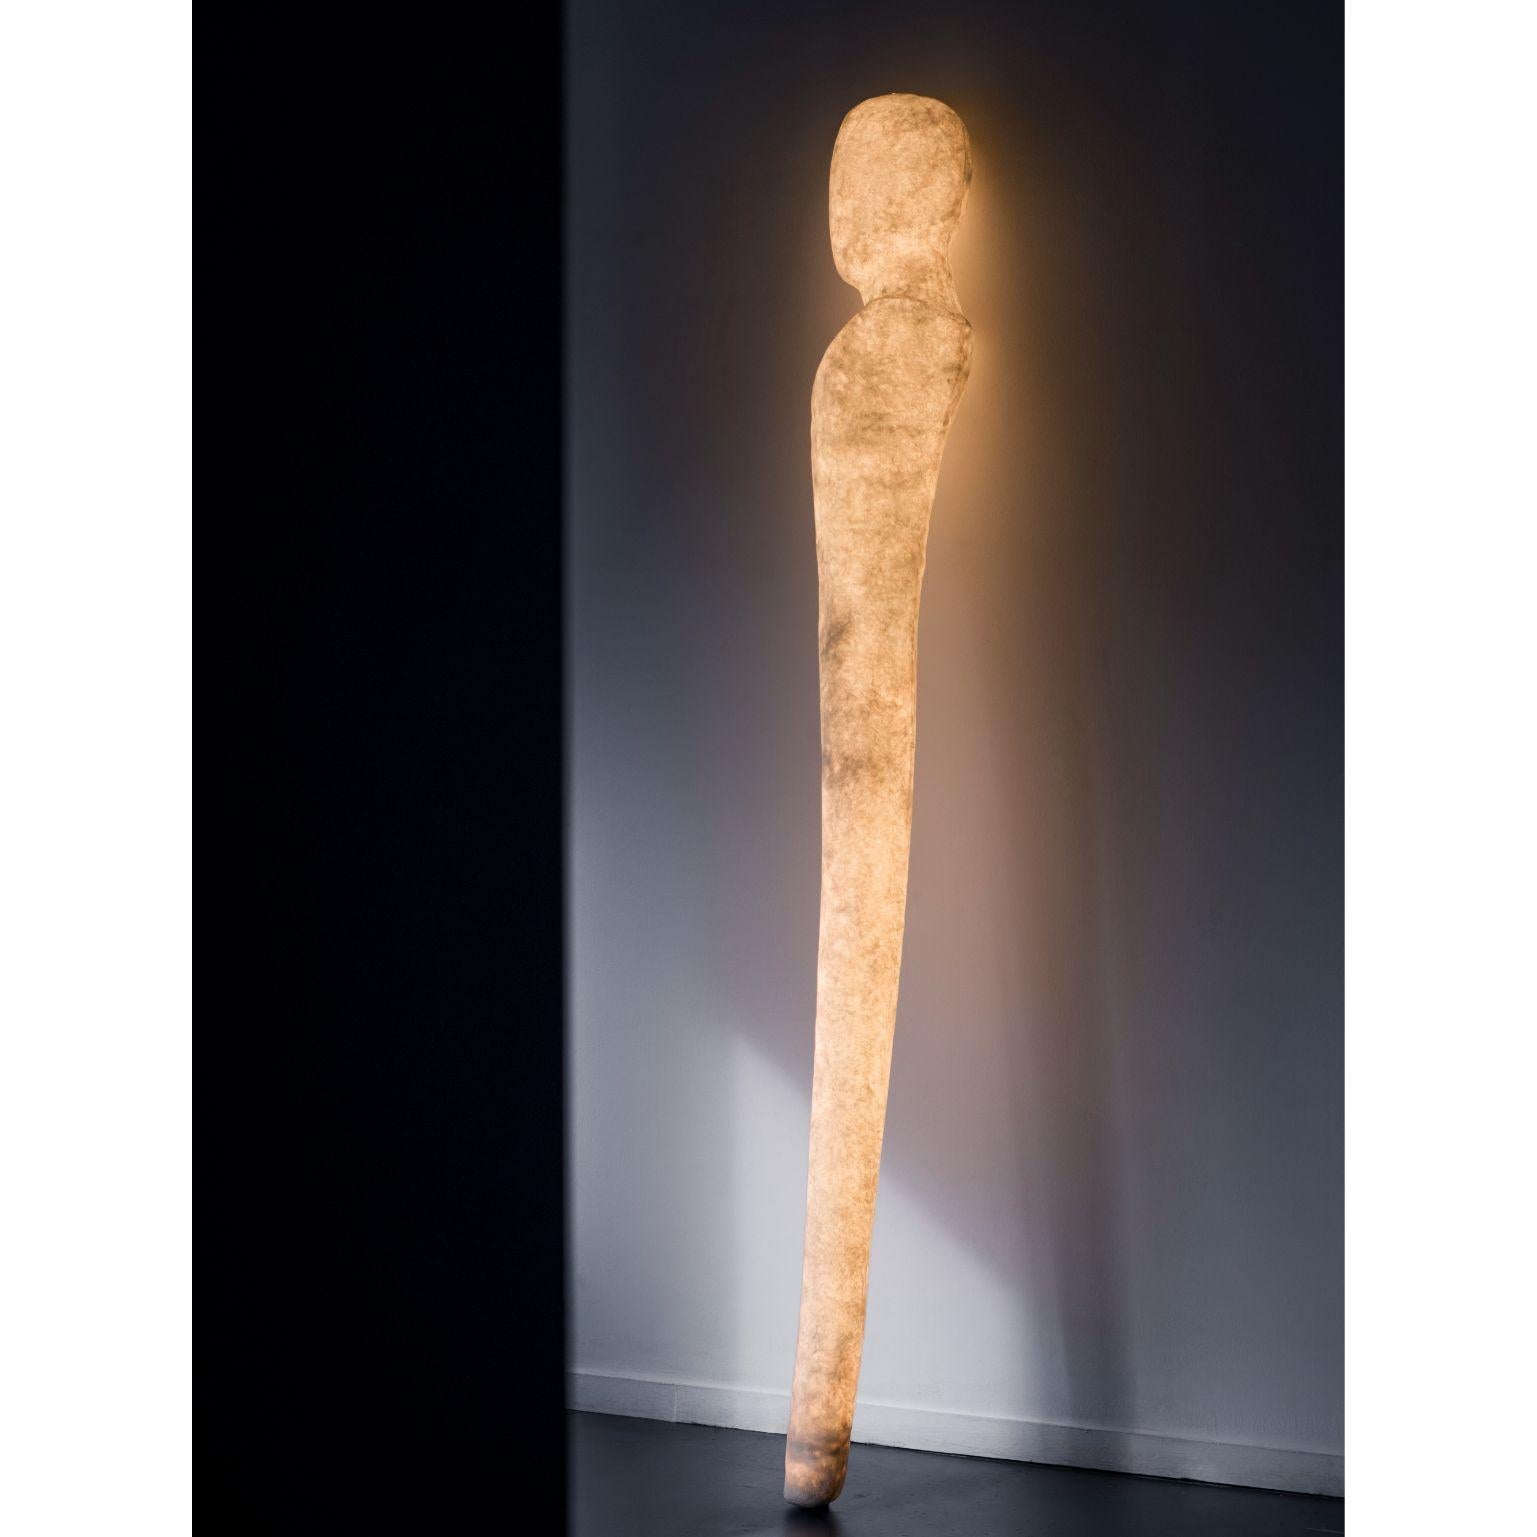 Contemplator light sculpture by Atelier Haute Cuisine
Dimensions: 235 cm
Materials: Fiberglass

All our lamps can be wired according to each country. If sold to the USA it will be wired for the USA for instance.

This light sculpture is